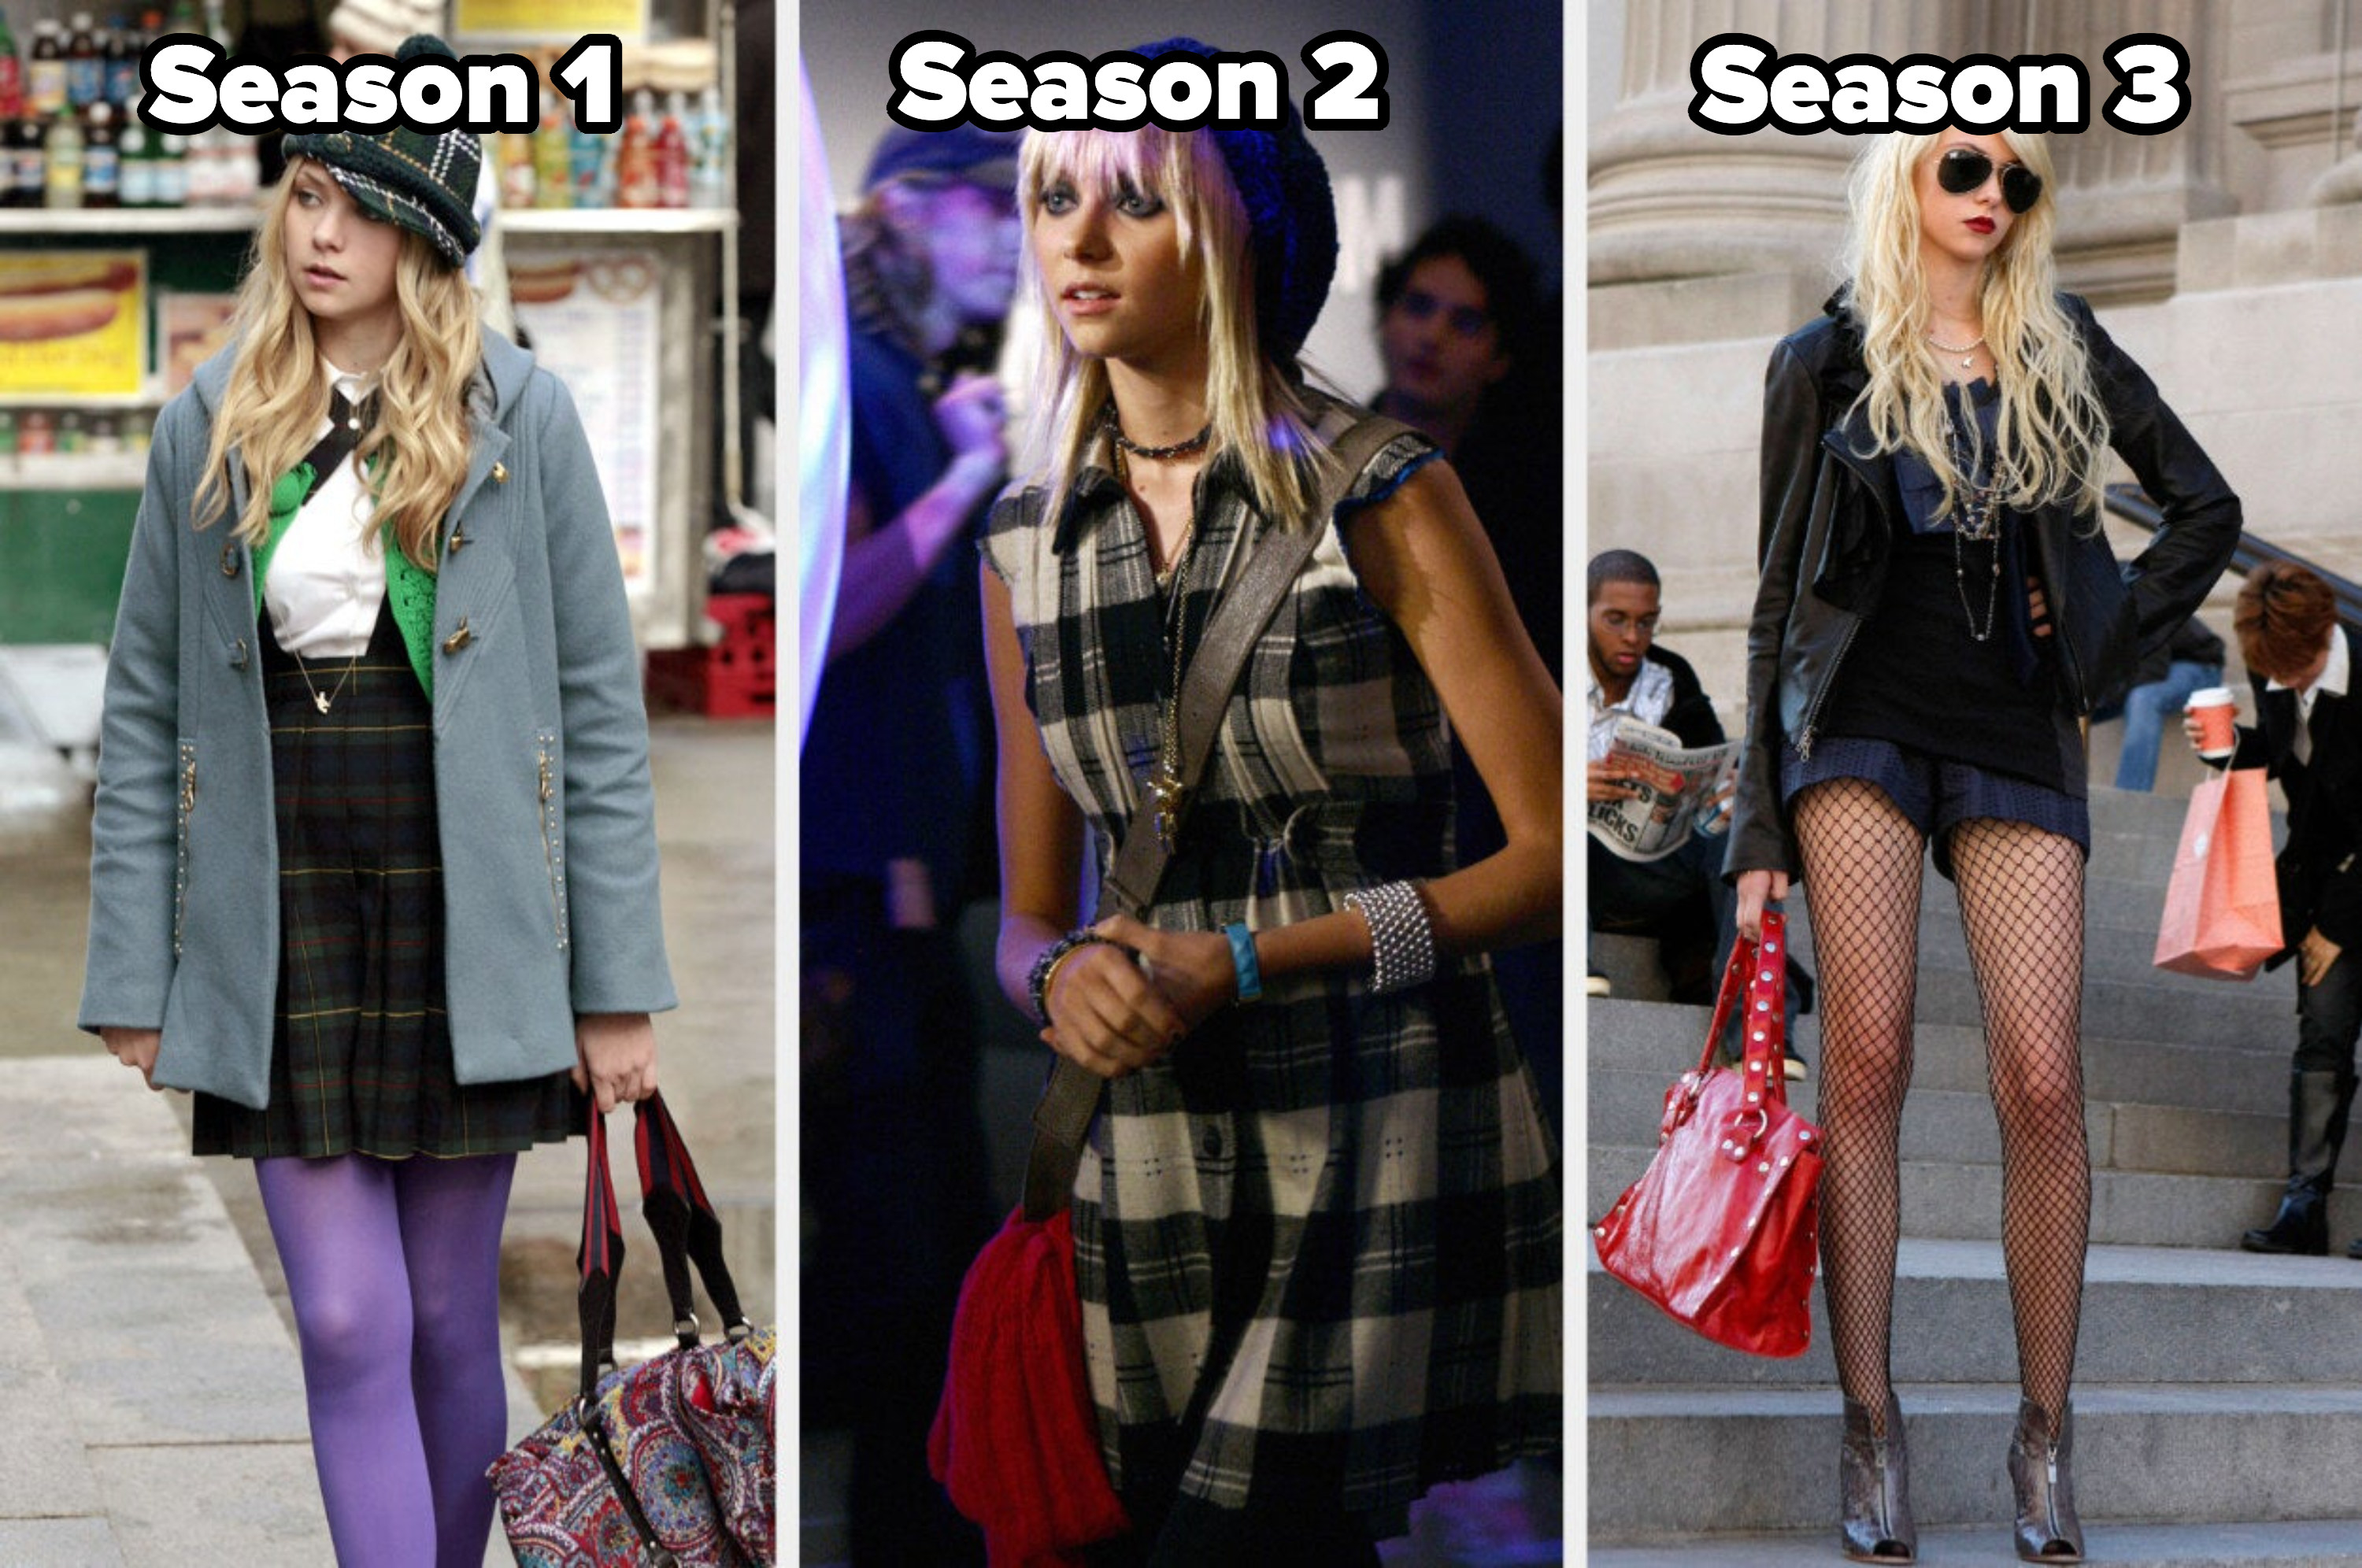 Jenny in seasons 1, 2, and 3, progressively dressing more edgy